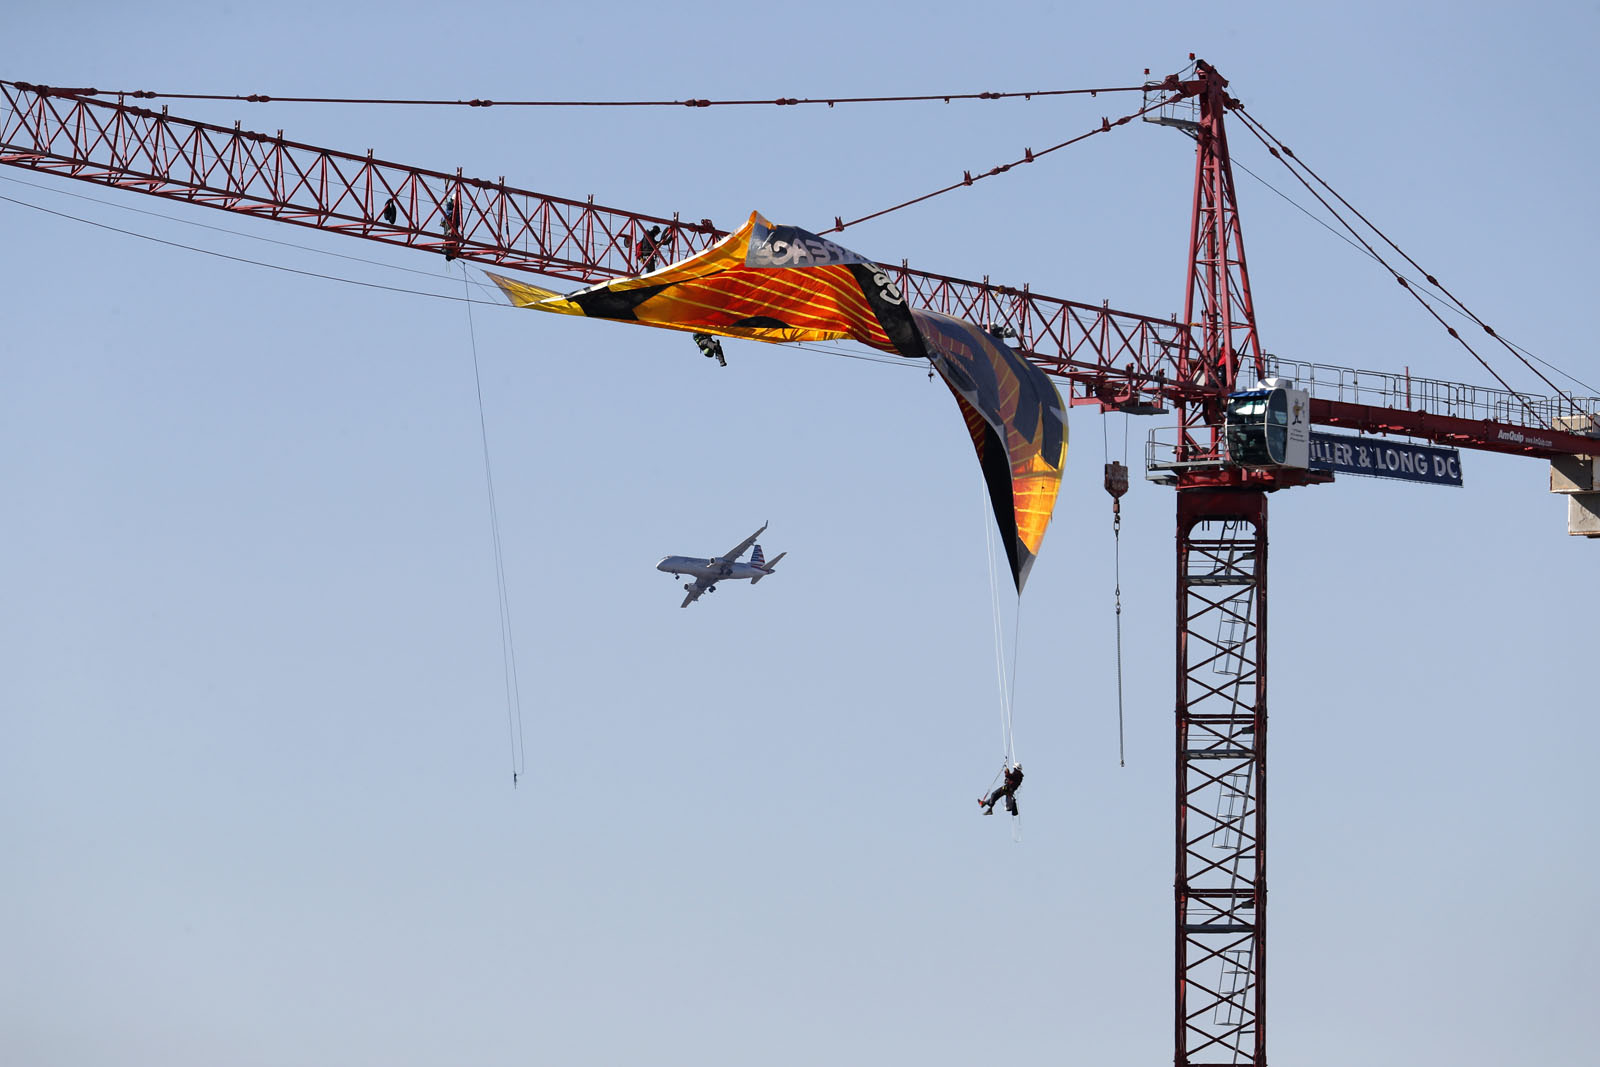 An airplane flies by the construction site of the former Washington Post building in Washington, Wednesday, Jan. 25, 2017, where Greenpeace protesters unfurled a banner that reads "Resist." (AP Photo/Carolyn Kaster)